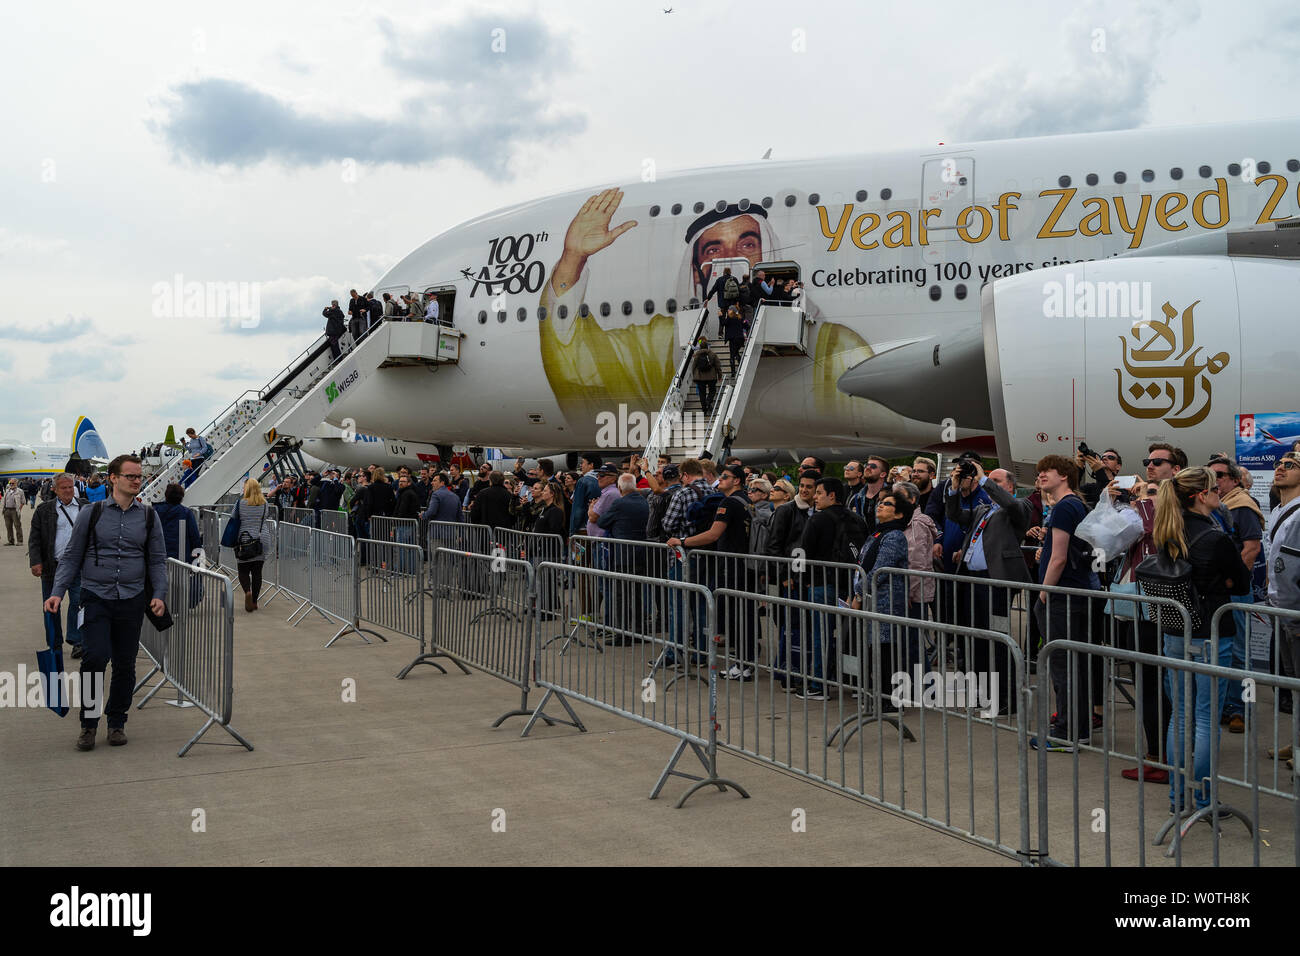 BERLIN - APRIL 27, 2018: The largest passenger airliner in the world Airbus A380. Emirates Airline. Exhibition ILA Berlin Air Show 2018 Stock Photo